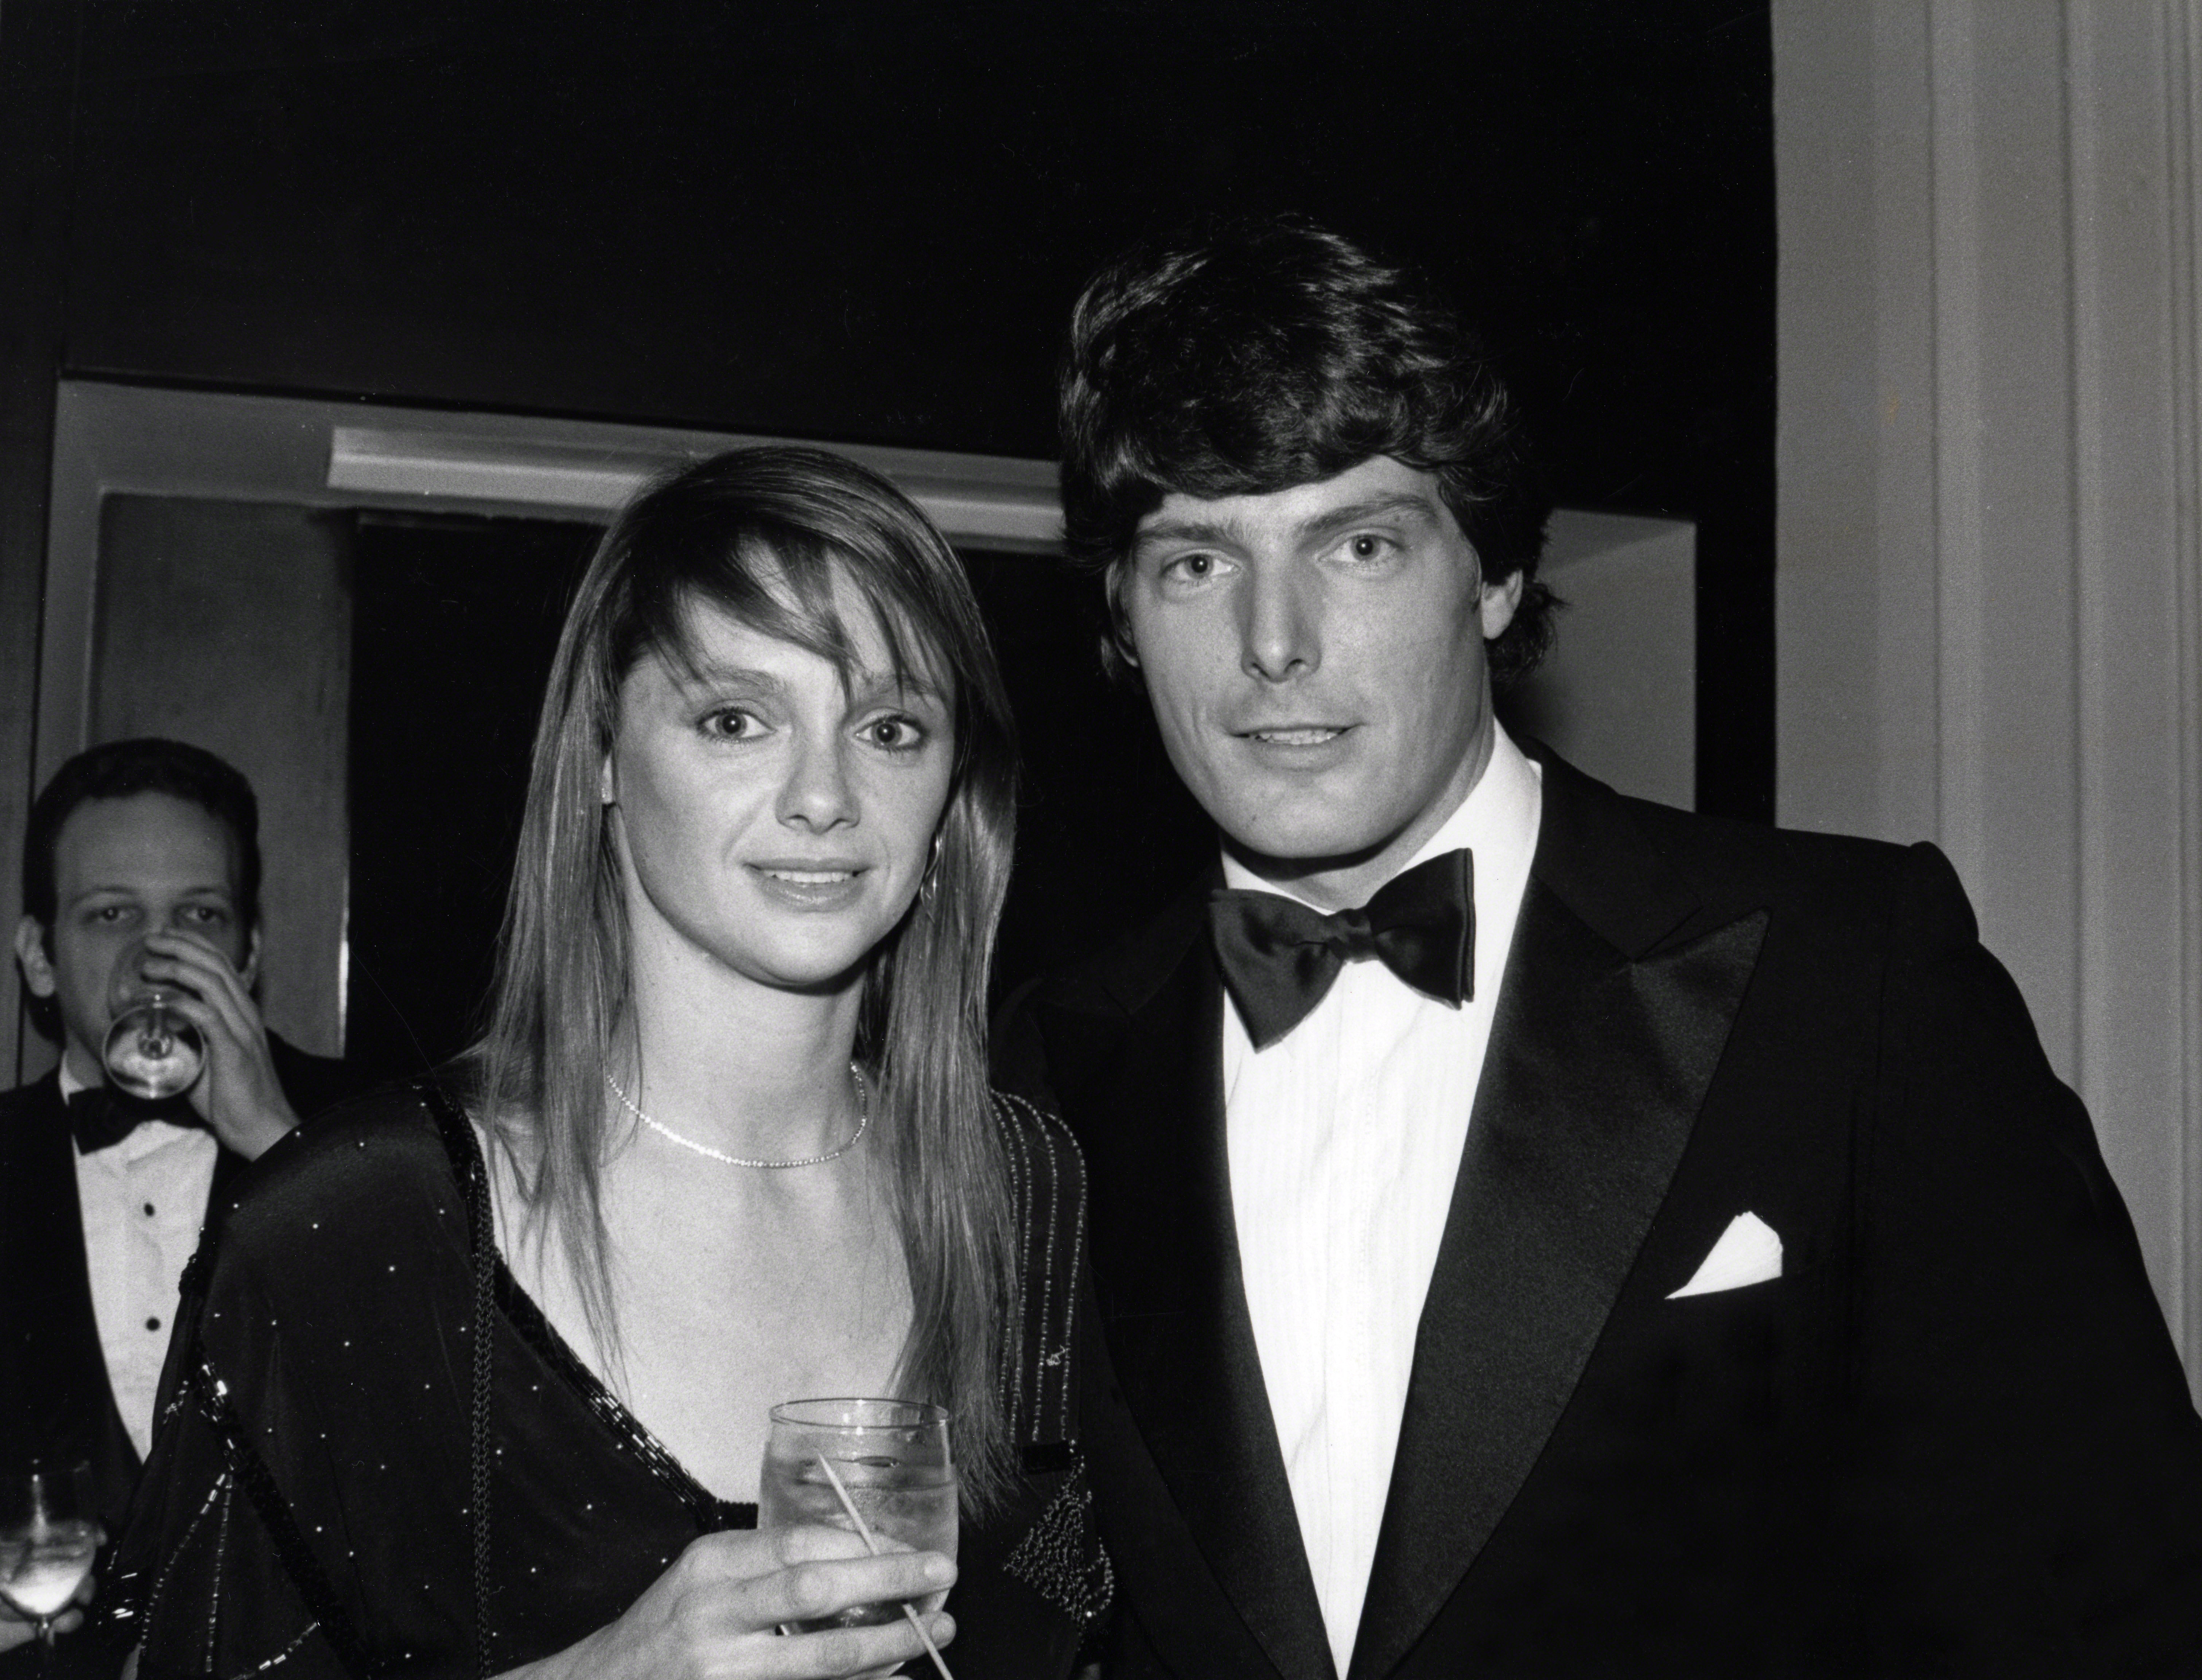 Christopher Reeve and Gae Exton attend the 55th Annual Academy Awards Governer's Ball circa 1983 in Los Angeles, California | Source: Getty Images